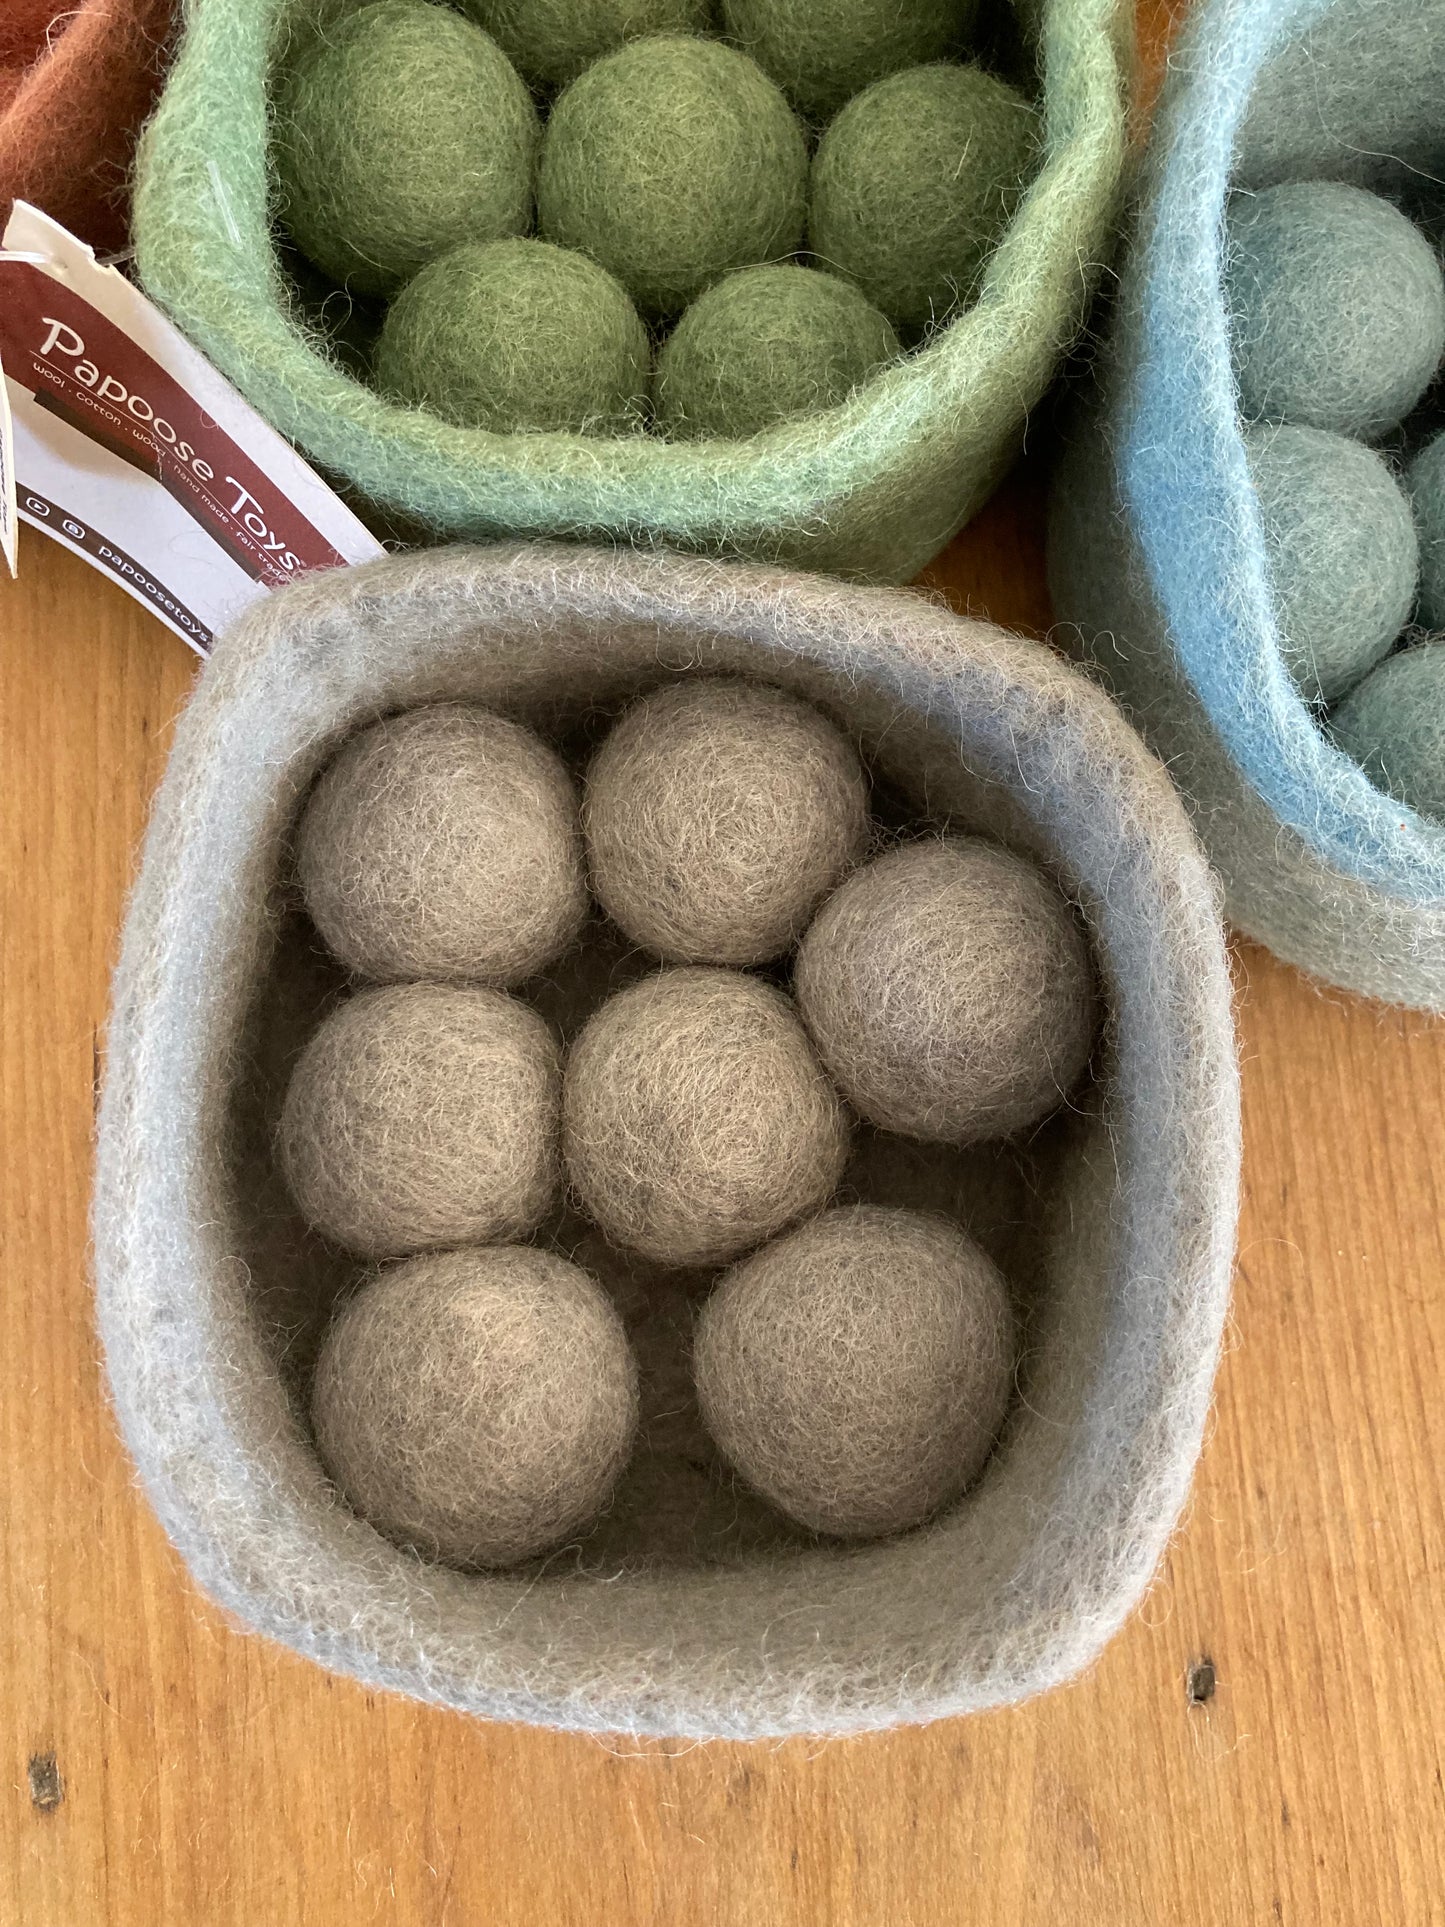 Felted Toys for Baby and Dollhouse Play Set - EARTH WOOL BALLS AND BOWLS, 48 pieces!